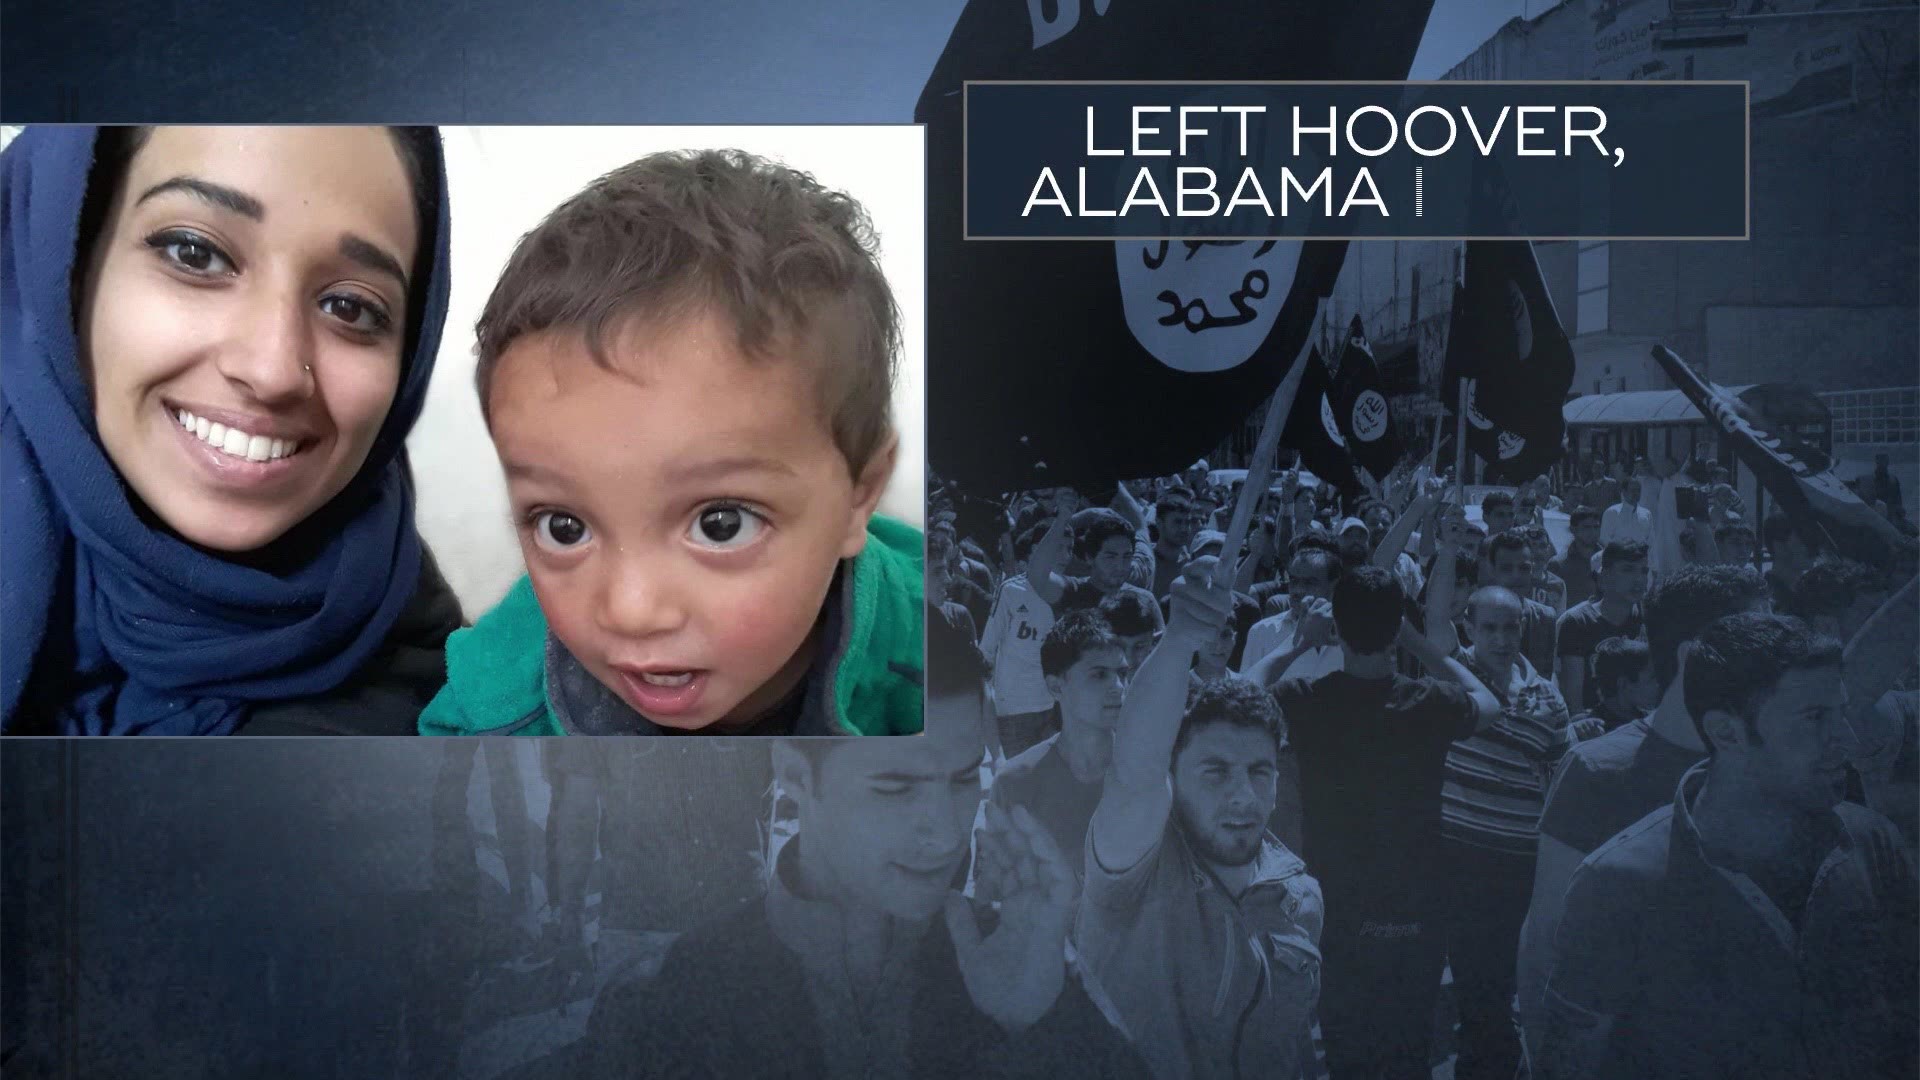 While studying business at the University of Alabama, Muthana told her family she was going on a school trip and instead flew to the Middle East. In a letter to her family, seen by CBS News, she wrote, "I was a naive, angry and arrogant young woman… seeing blood shed up close changed me."